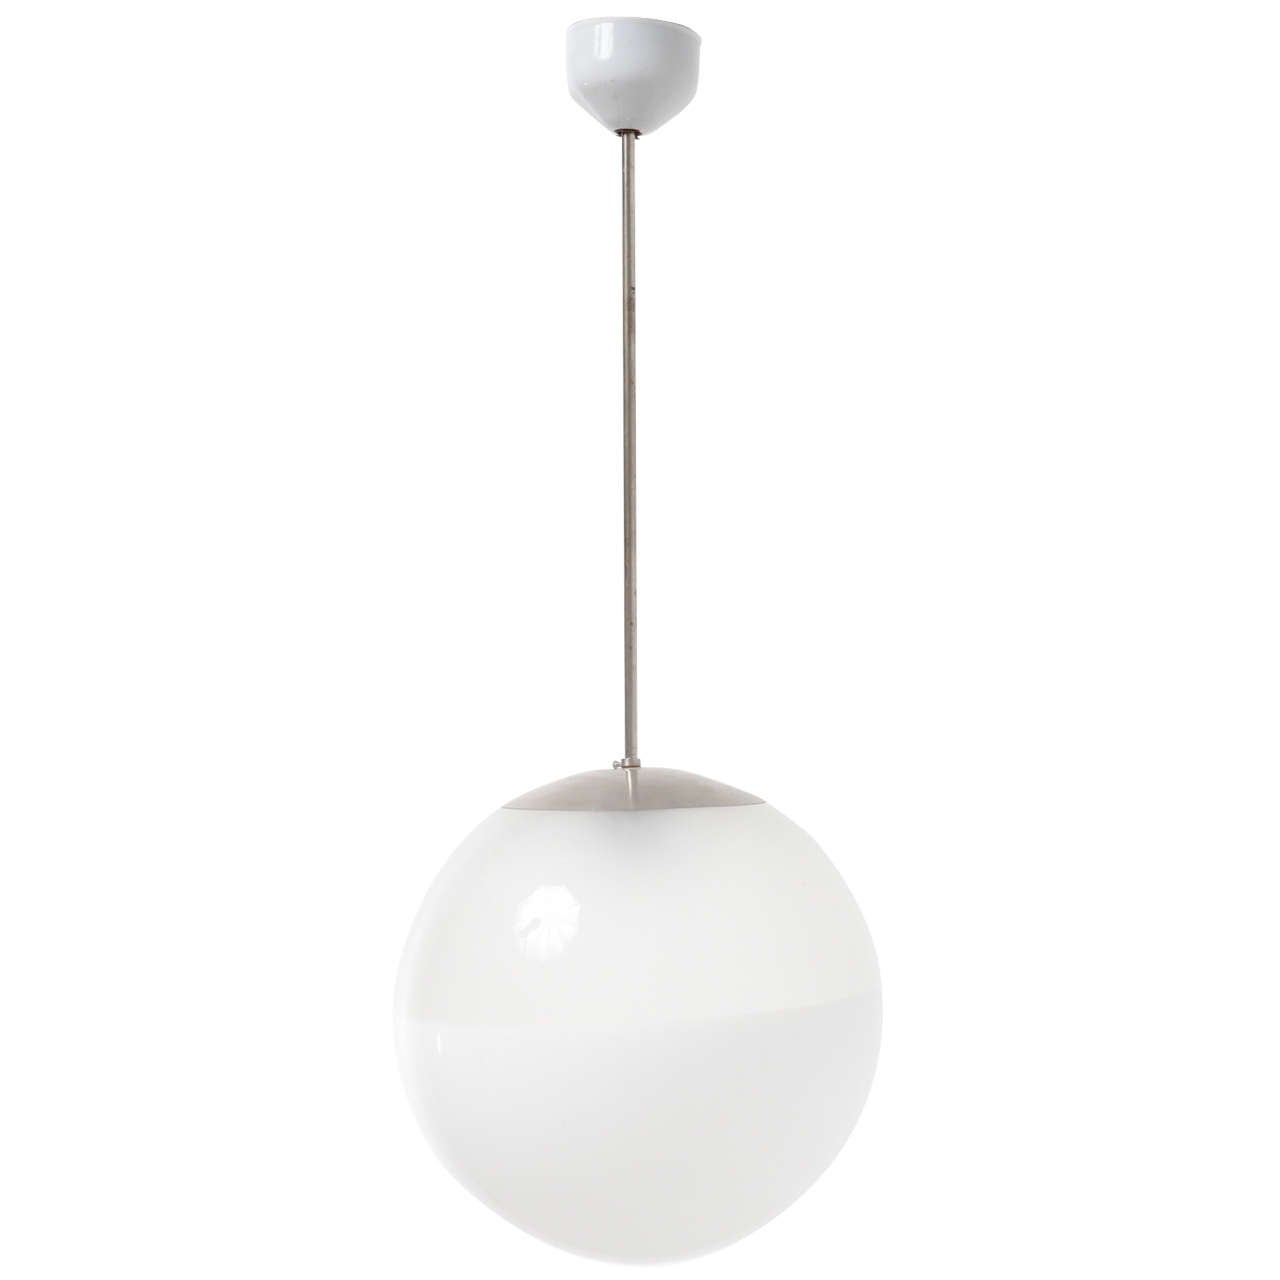 A transparent part at the top of the diffuser lets the light indirectly transfer outside. The bottom part of the diffuser is finished in white opaline glass. It is handcrafted using Murano glass and is equipped with an E26 light source. It provides